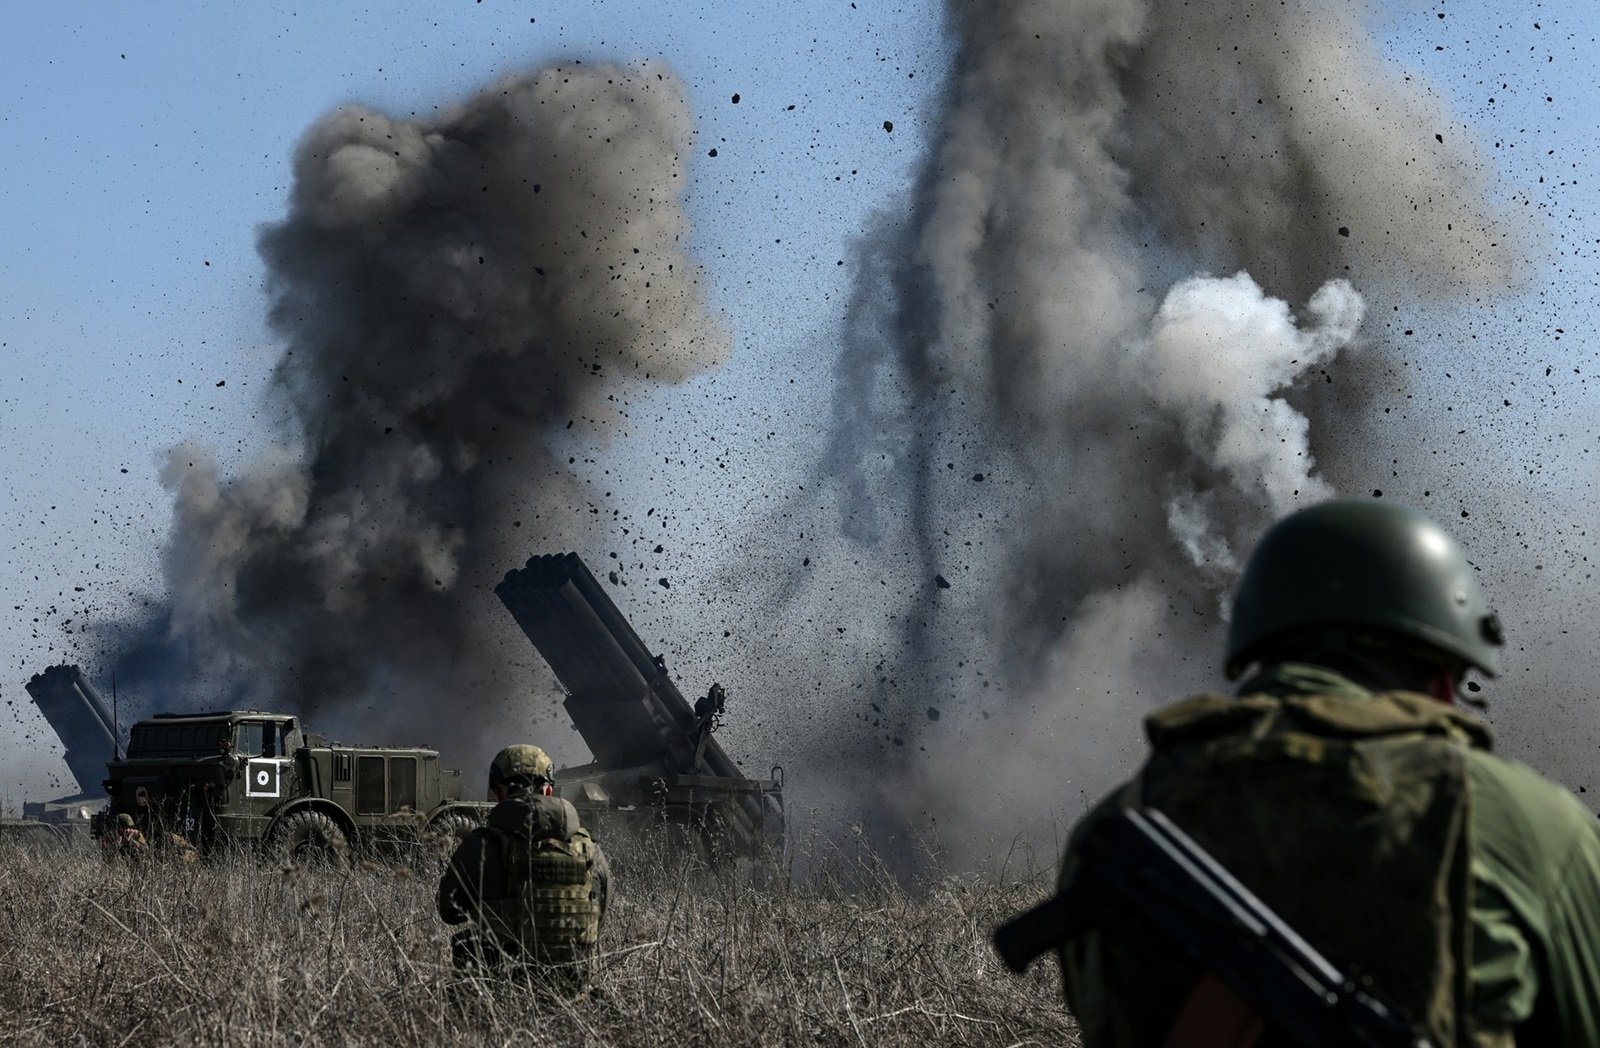 8637485 08.03.2024 Russian servicemen of the artillery brigade division of the Centre group of forces fire BM-27 9K57 Uragan (Hurricane) multiple launch rocket systems towards positions of the Ukrainian Armed Forces in the Avdiivka sector of the front line amid Russia's military operation in Ukraine, Russia.,Image: 855006914, License: Rights-managed, Restrictions: Editors' note: THIS IMAGE IS PROVIDED BY RUSSIAN STATE-OWNED AGENCY SPUTNIK., Model Release: no, Credit line: Stanislav Krasilnikov / Sputnik / Profimedia